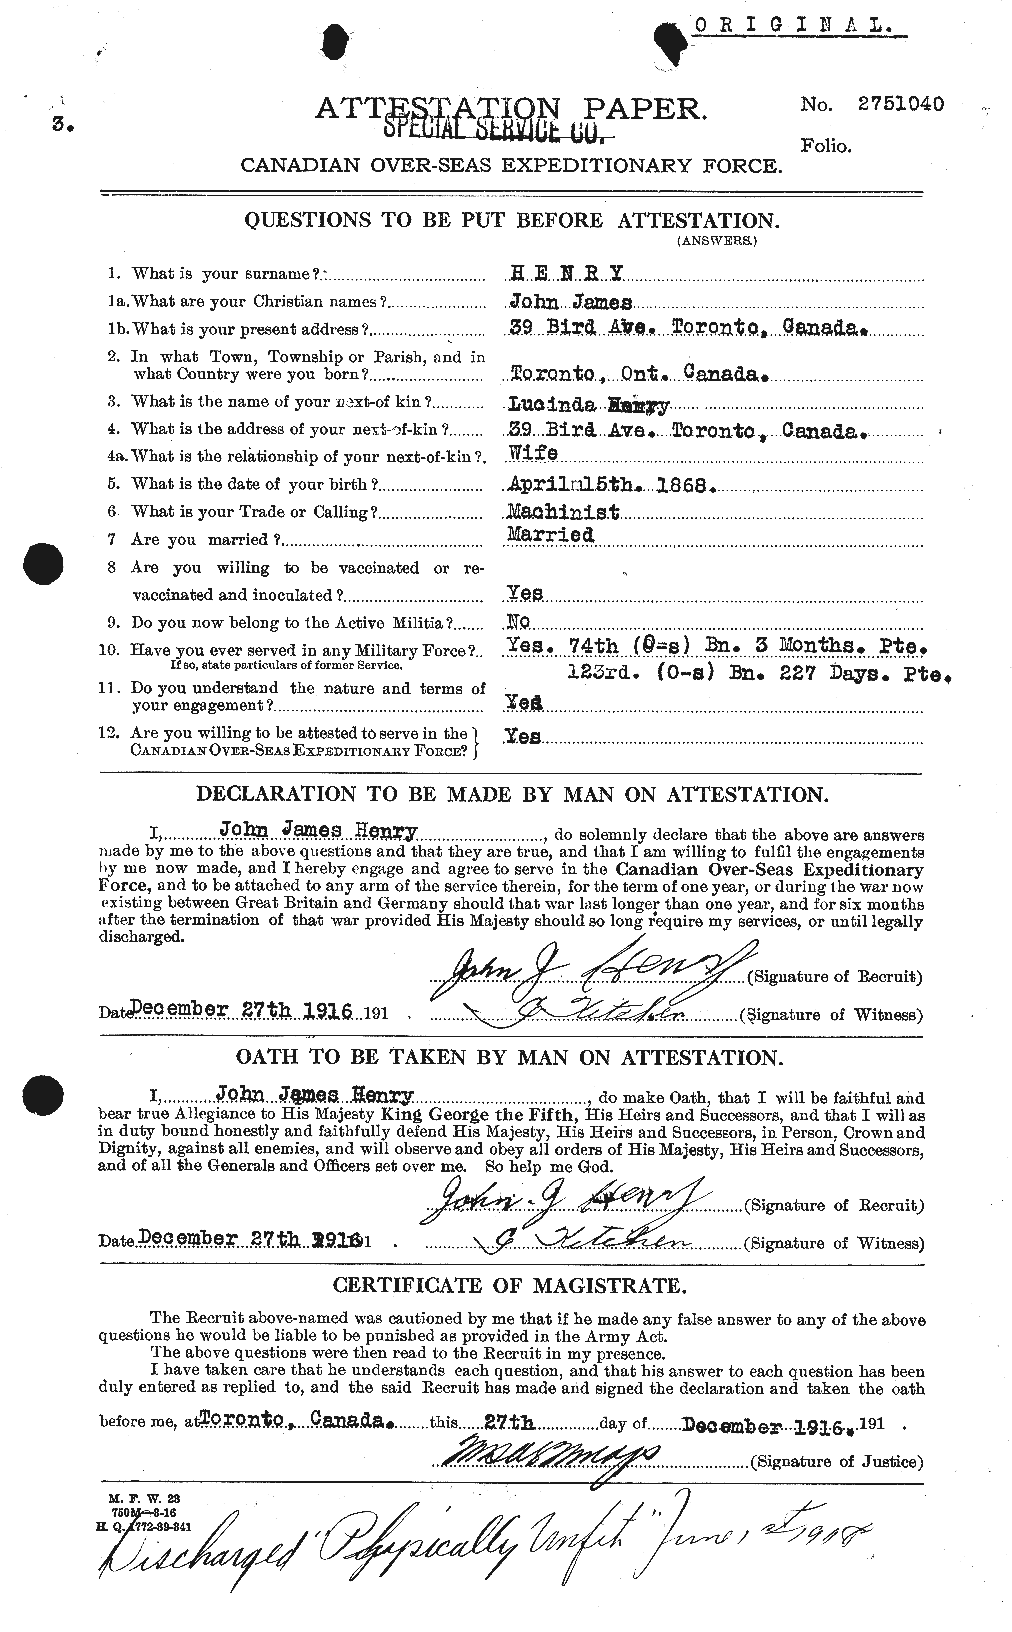 Personnel Records of the First World War - CEF 387623a